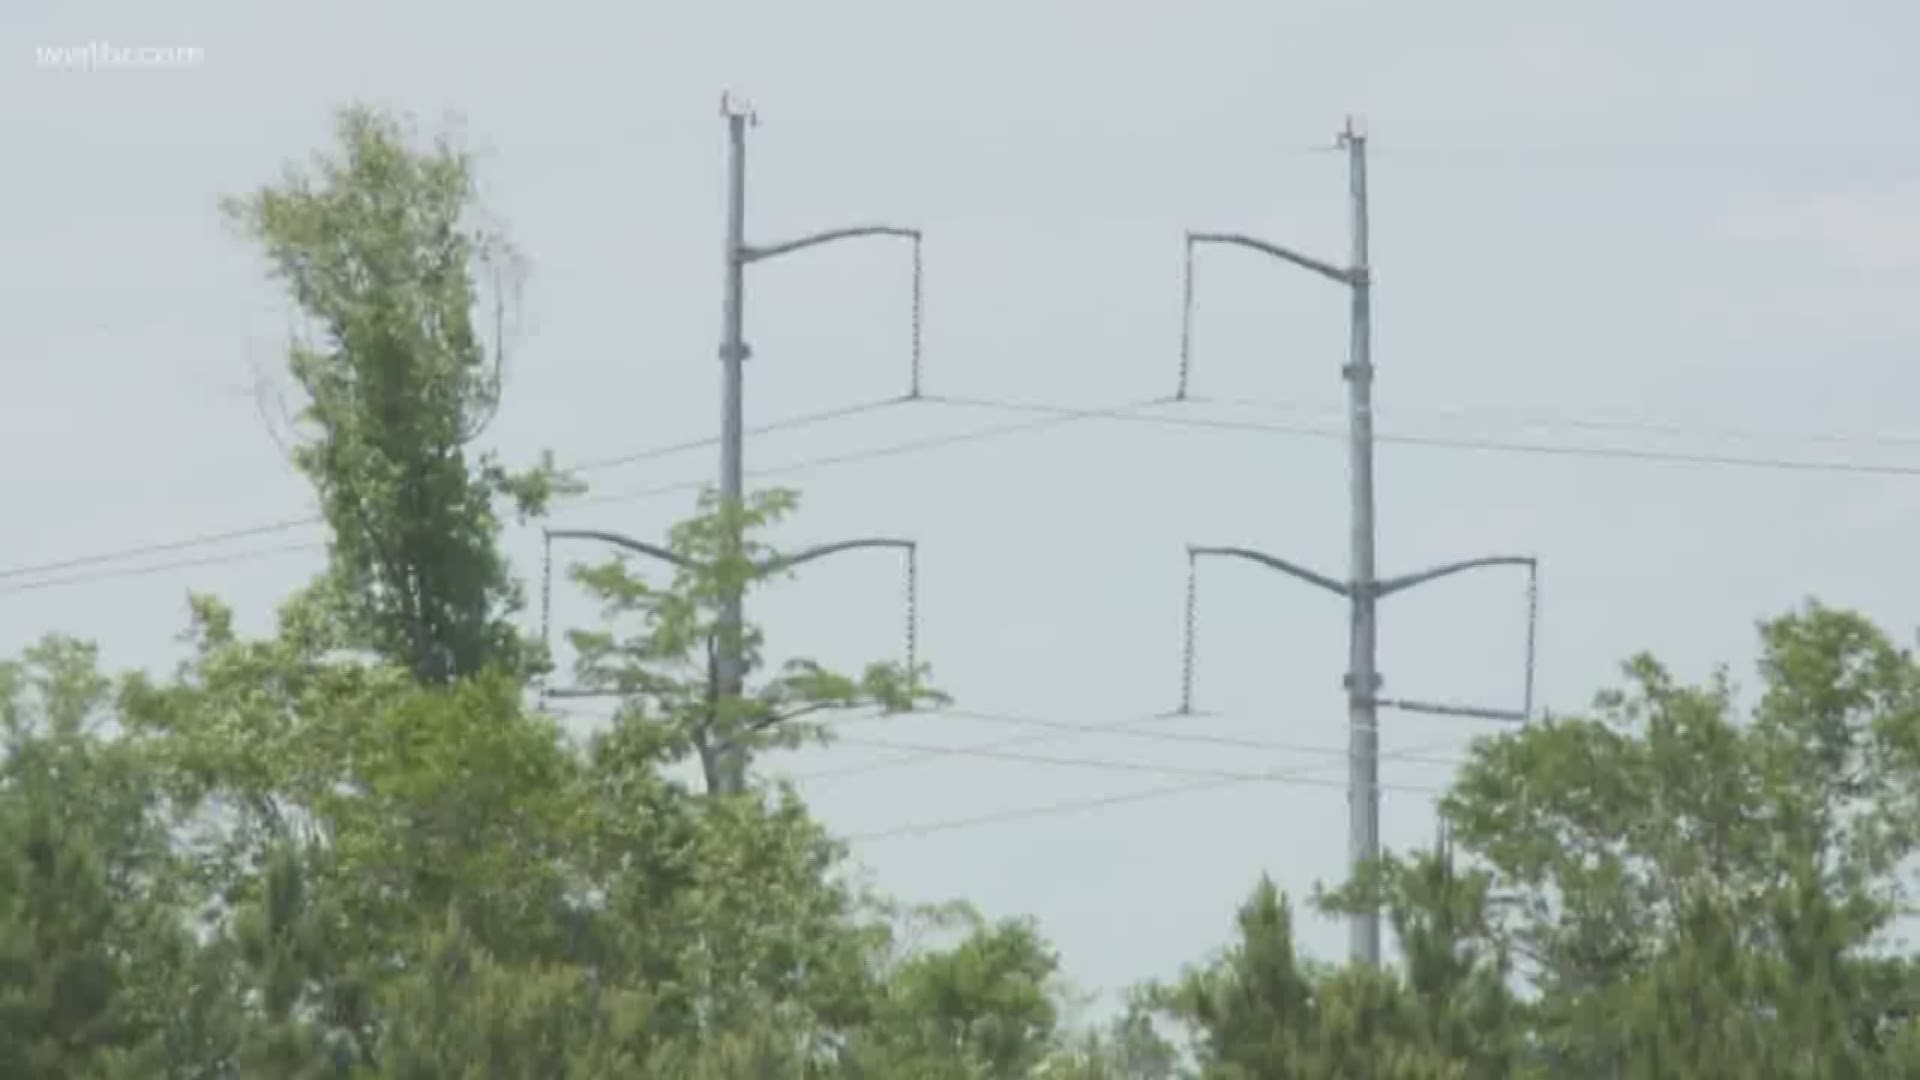 A movement has been underway to move low hanging power lines near the Slidell airport that recently tripped up a small plane with two pilots inside. One of the men perished.